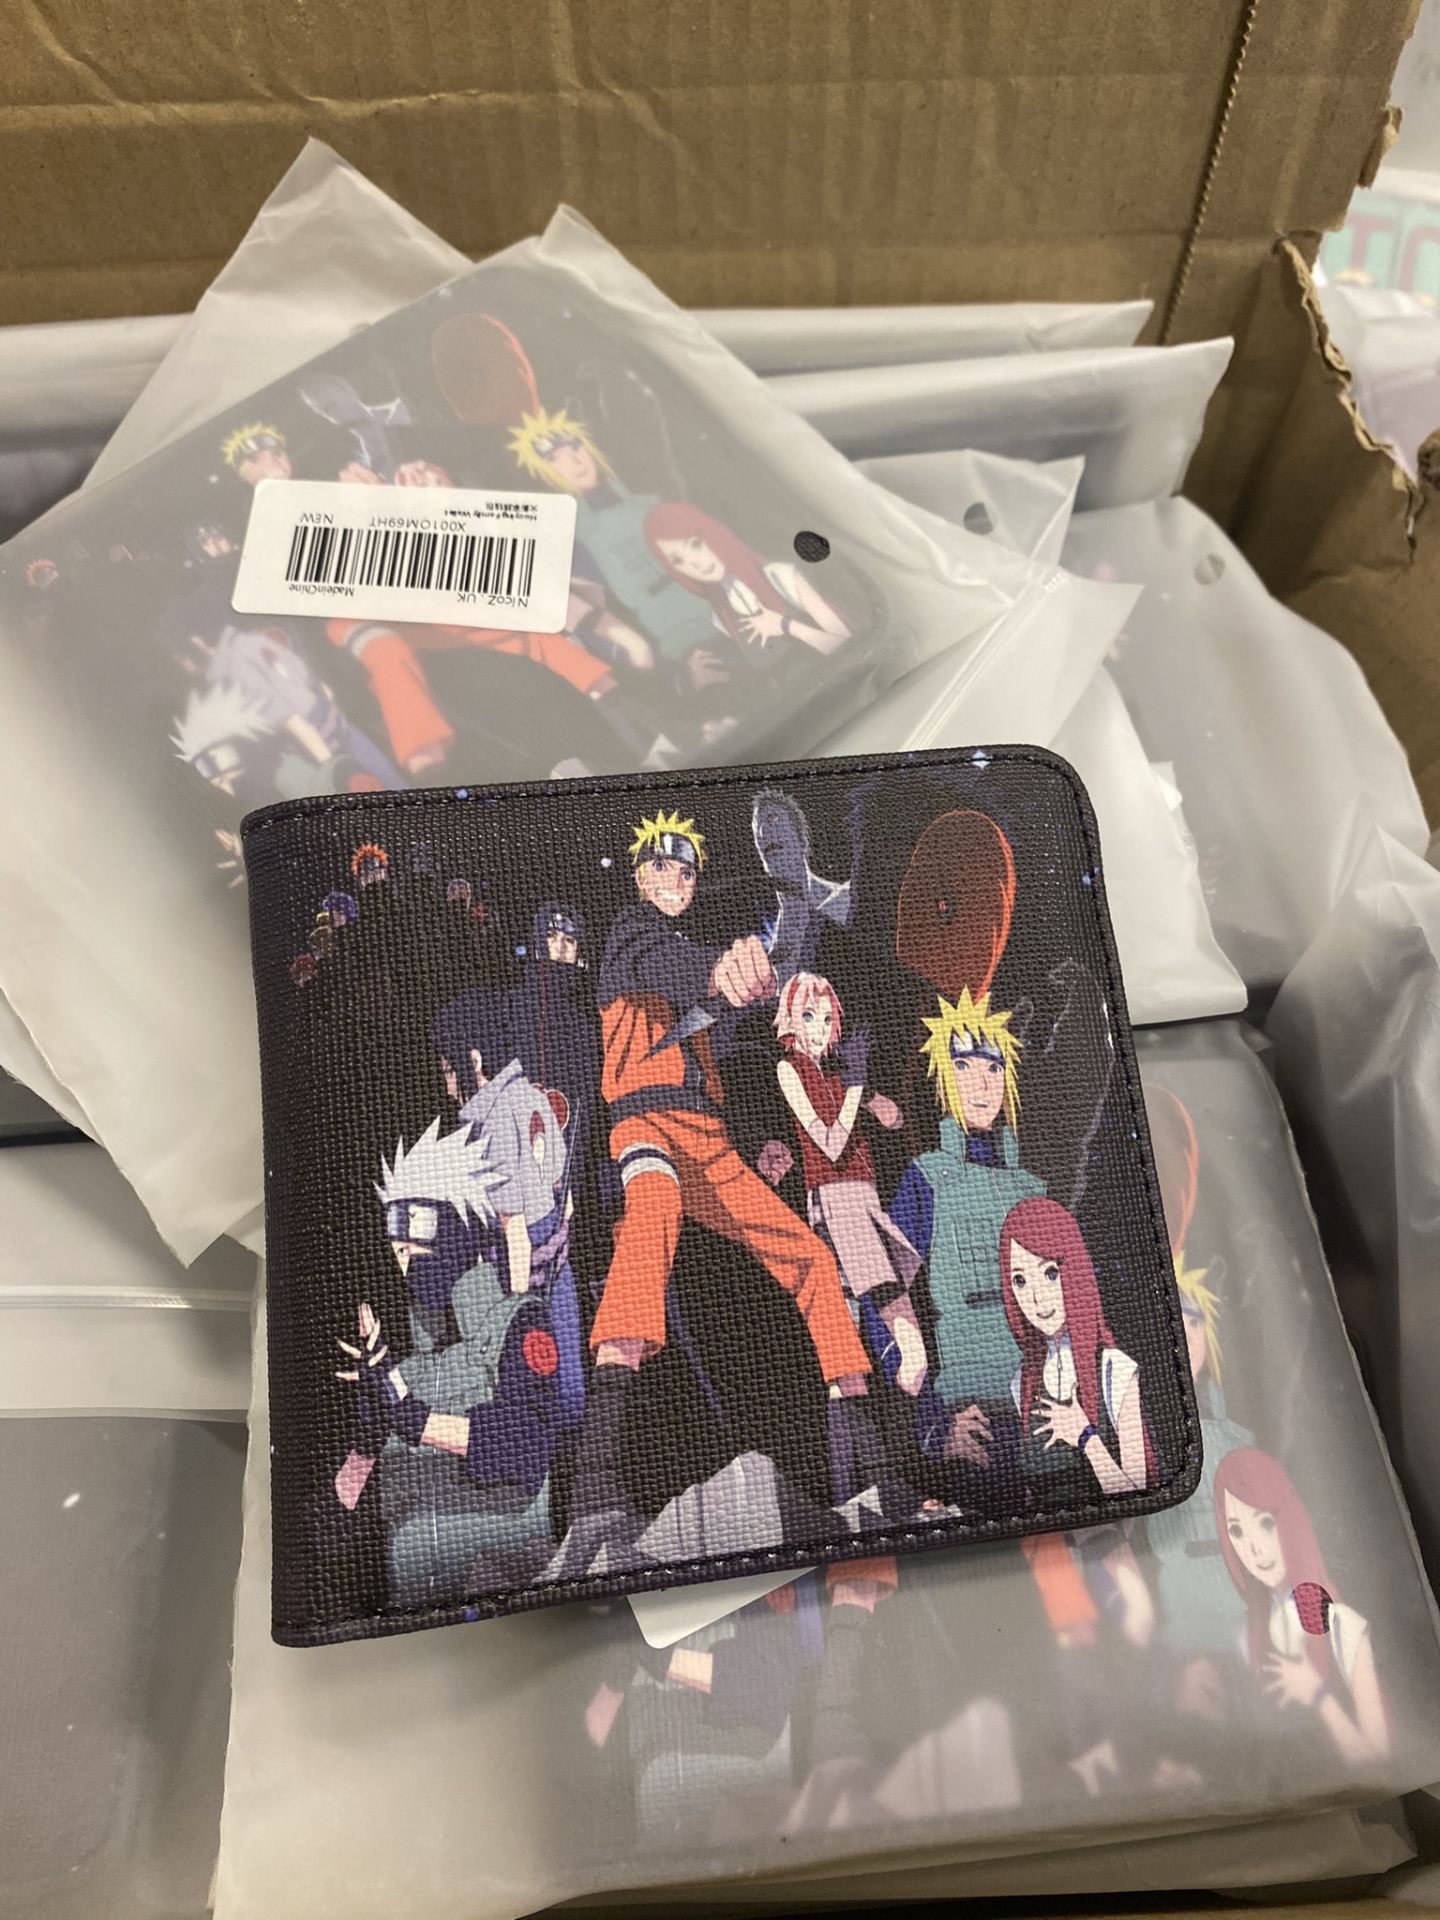 RRP £39 Set of 3 x Qerrassa Wallet Bi-Fold Anime Leather Wallets with Zip Coin Pocket, RFID Blocking - Image 2 of 2